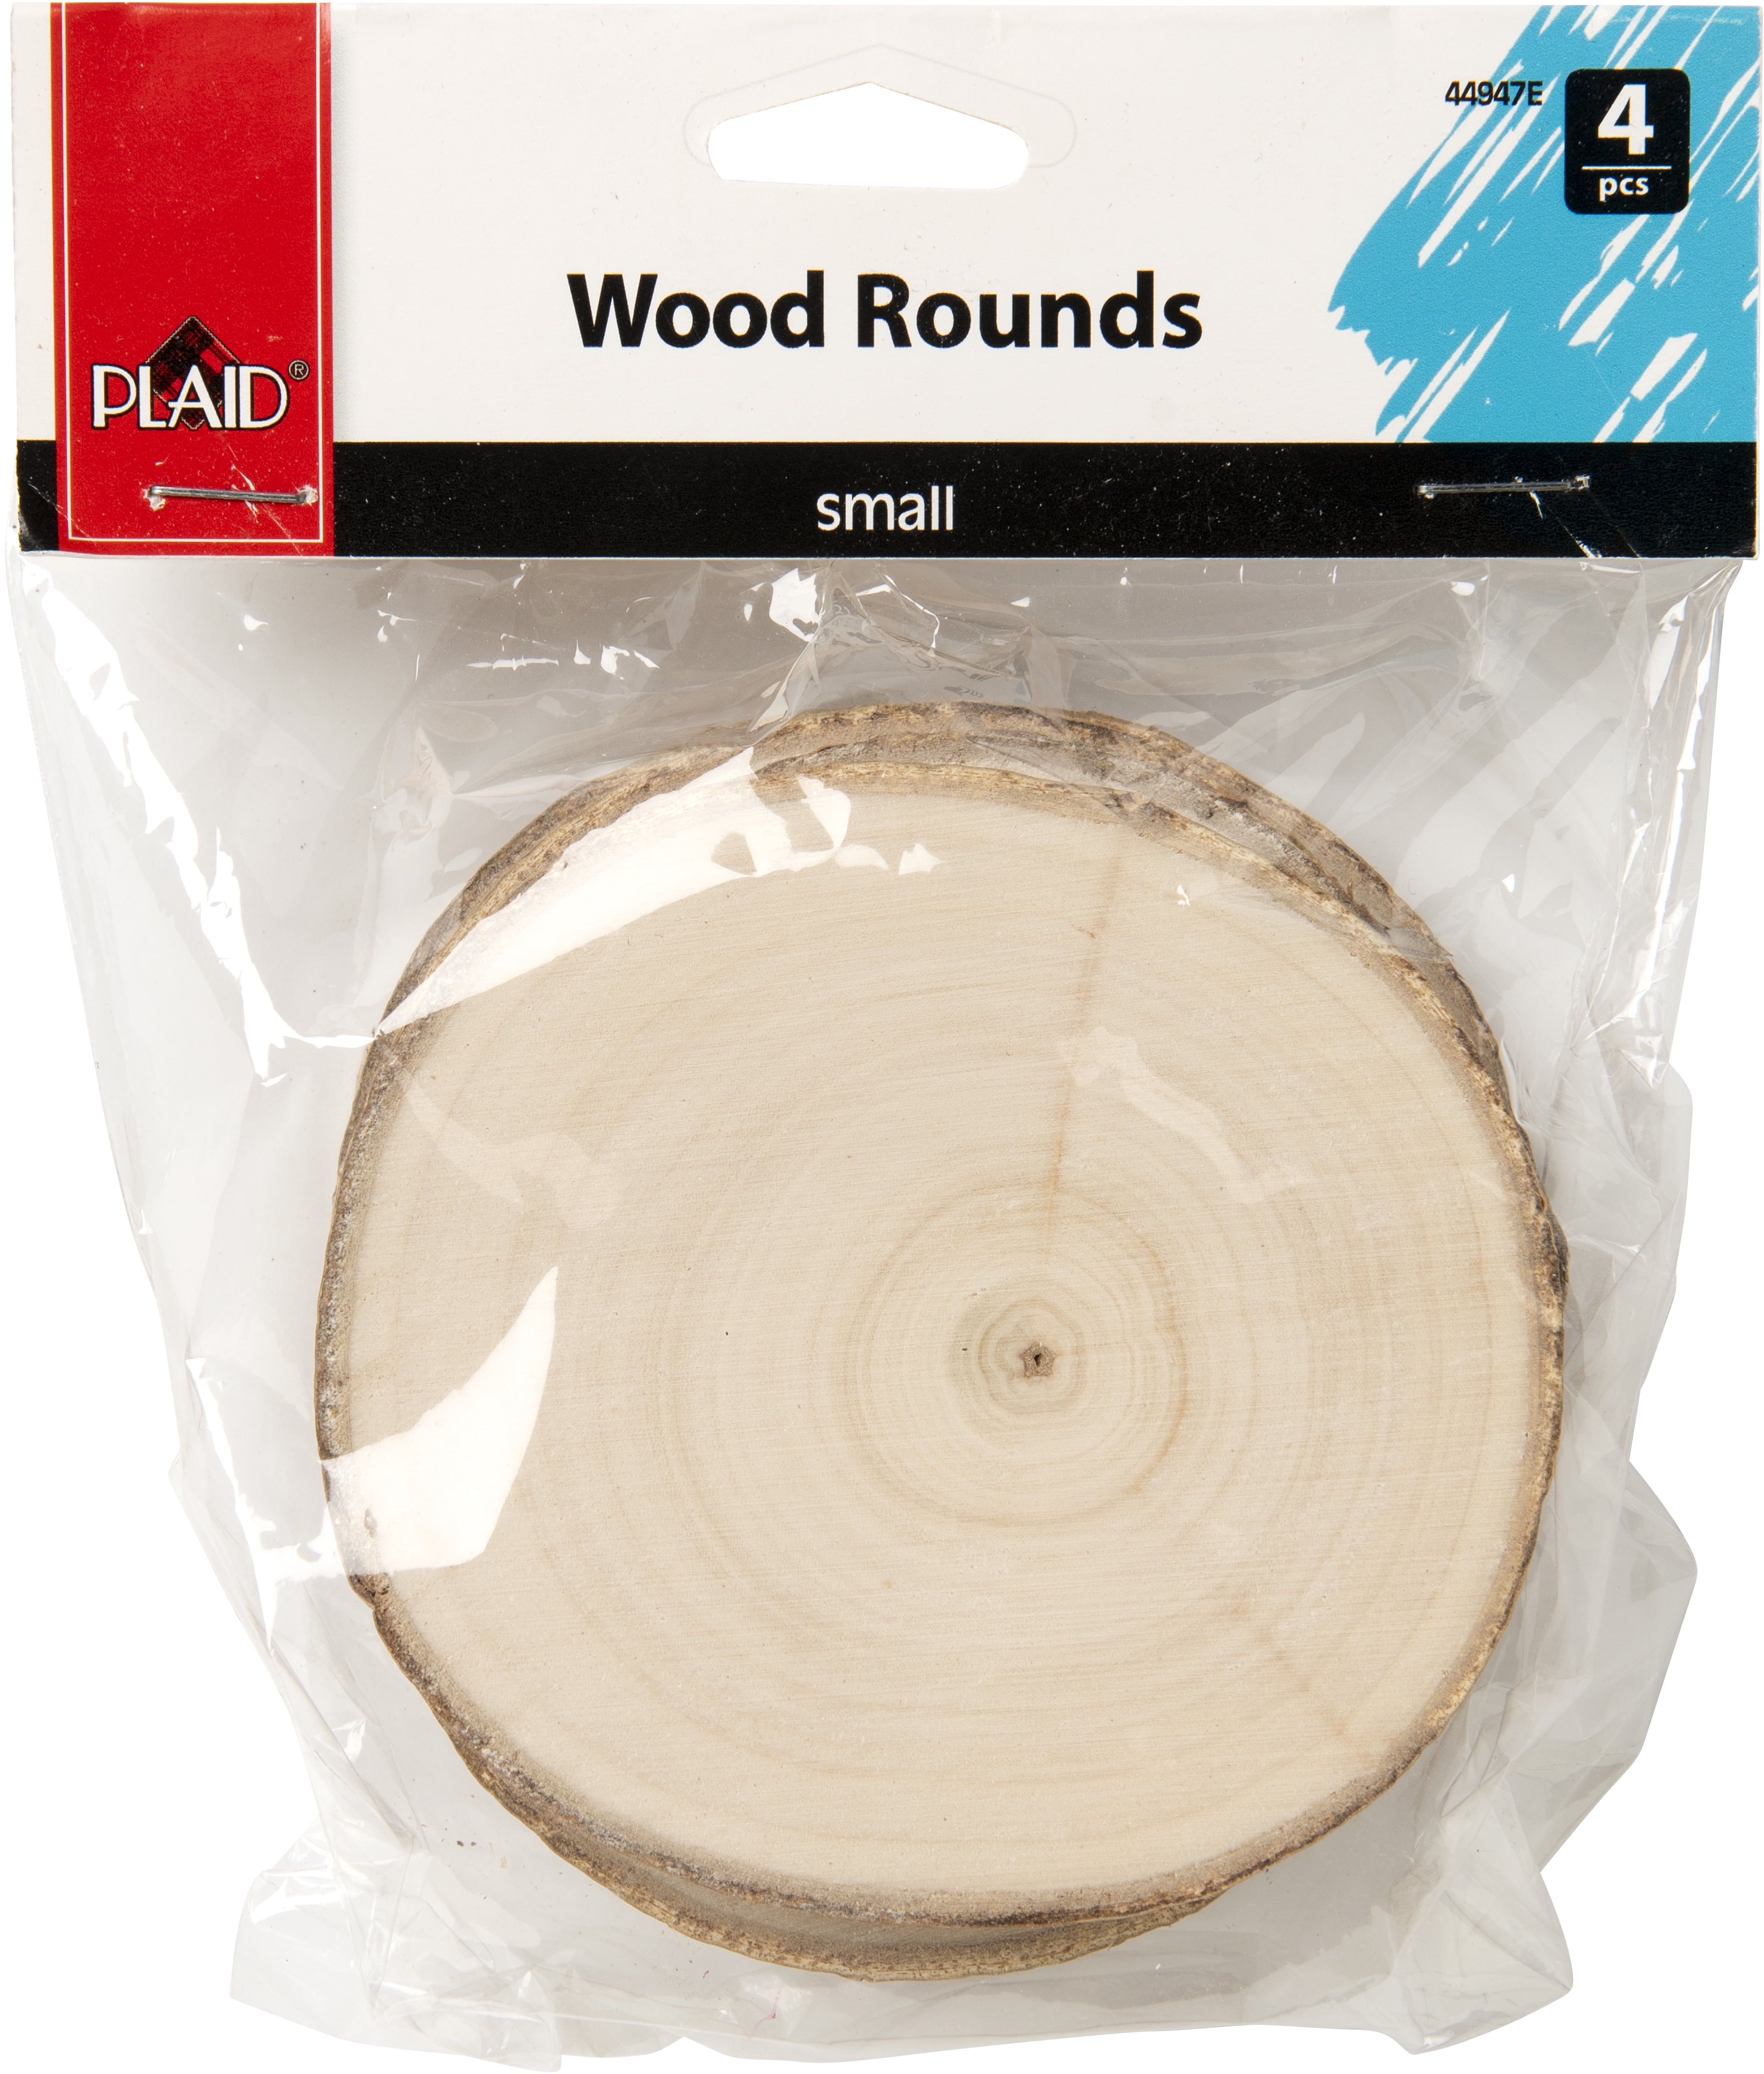 Plaid Unpainted Wood Surface, Small Wood Round With Bark, 4 Piece